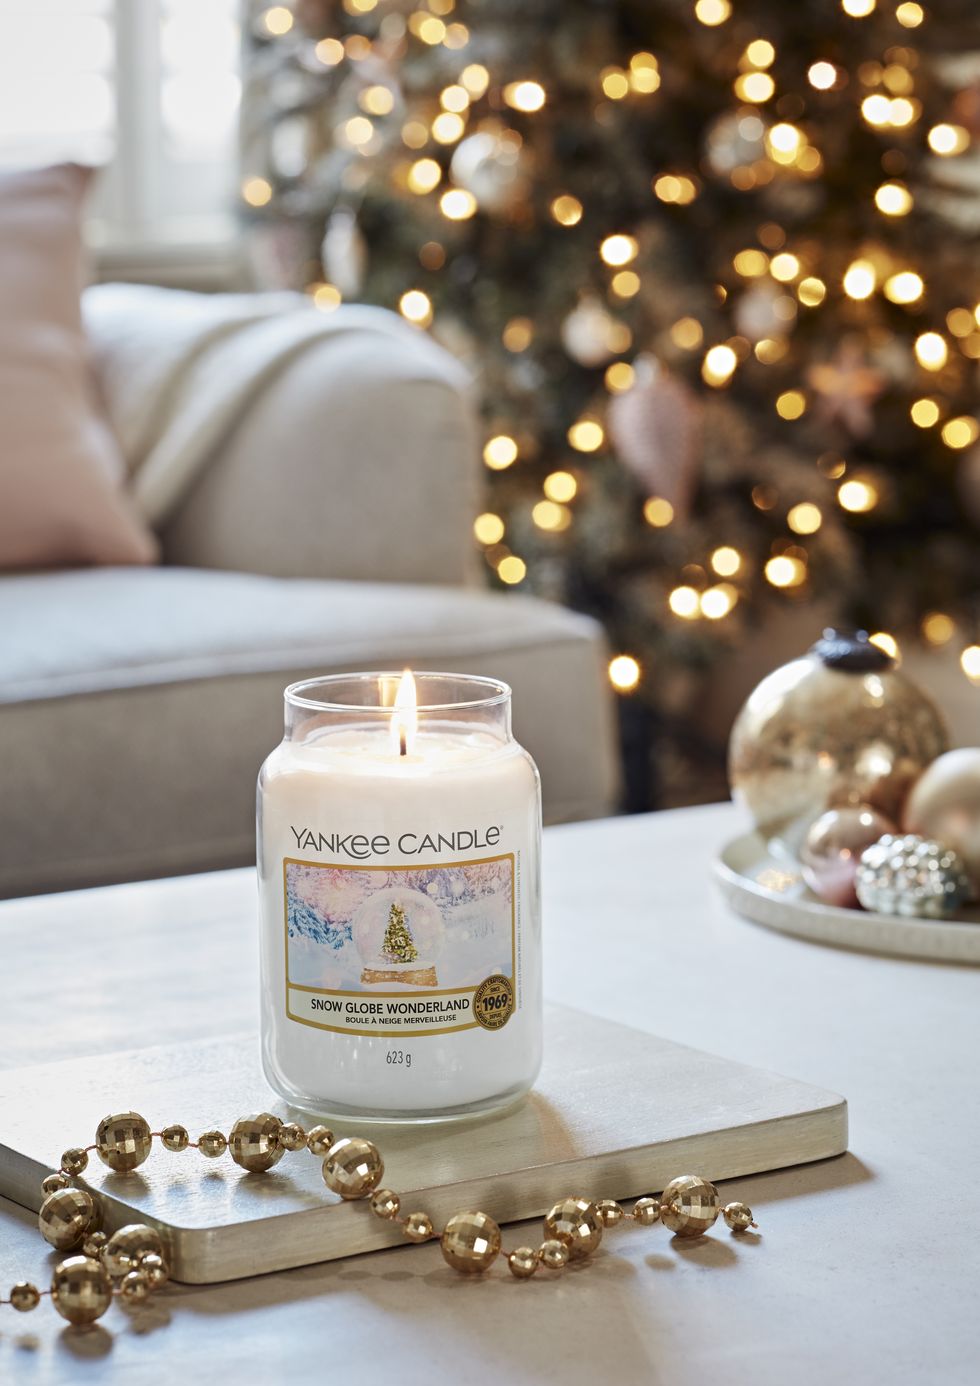 https://hips.hearstapps.com/hmg-prod/images/yankee-candle-christmas-collection-2022-yc-02-22-22329-hrc-1-1662465517.jpg?resize=980:*